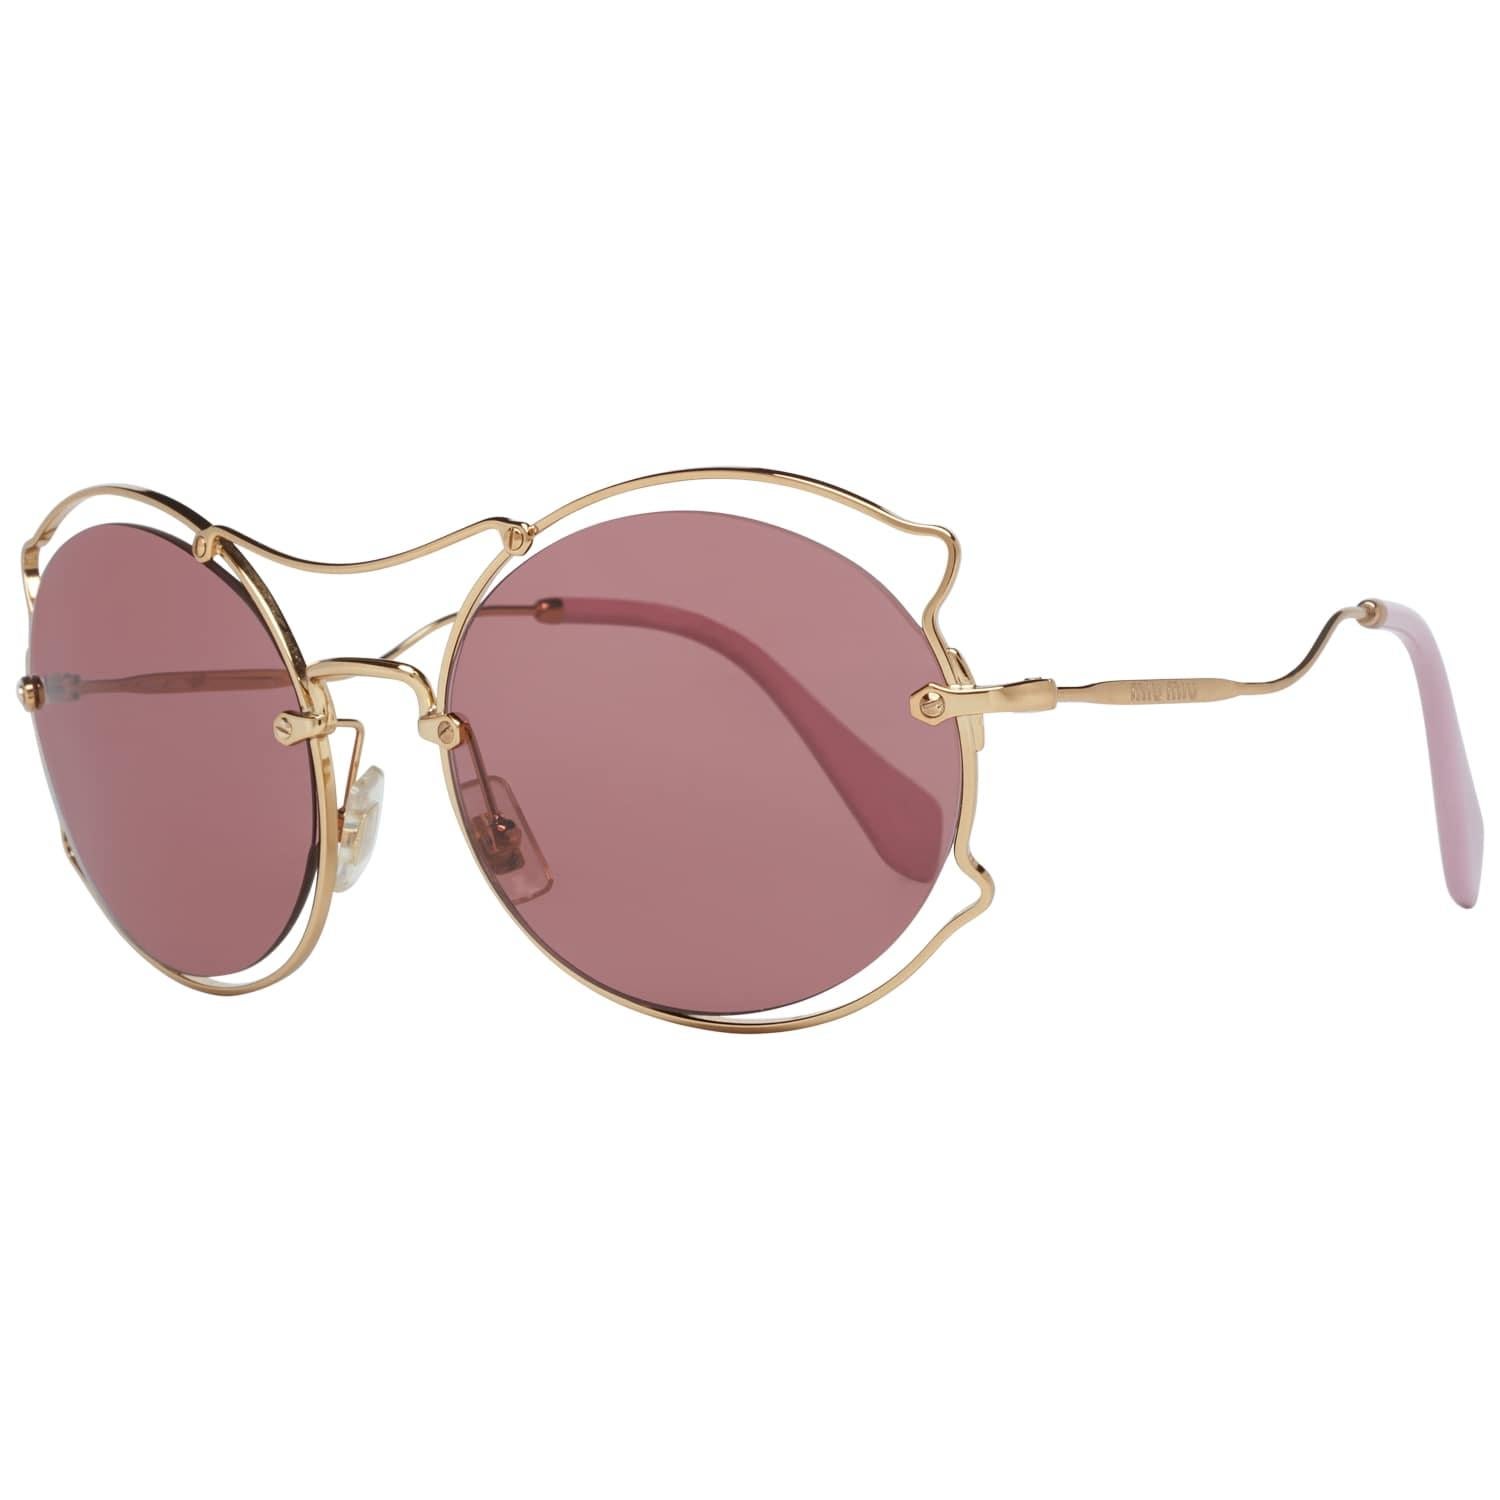 Details

MATERIAL: Metal

COLOR: Gold

MODEL: MU50SS 7OE0A057

GENDER: Women

COUNTRY OF MANUFACTURE: Italy

TYPE: Sunglasses

ORIGINAL CASE?: Yes

STYLE: Round

OCCASION: Casual

FEATURES: Lightweight

LENS COLOR: Pink

LENS TECHNOLOGY: No